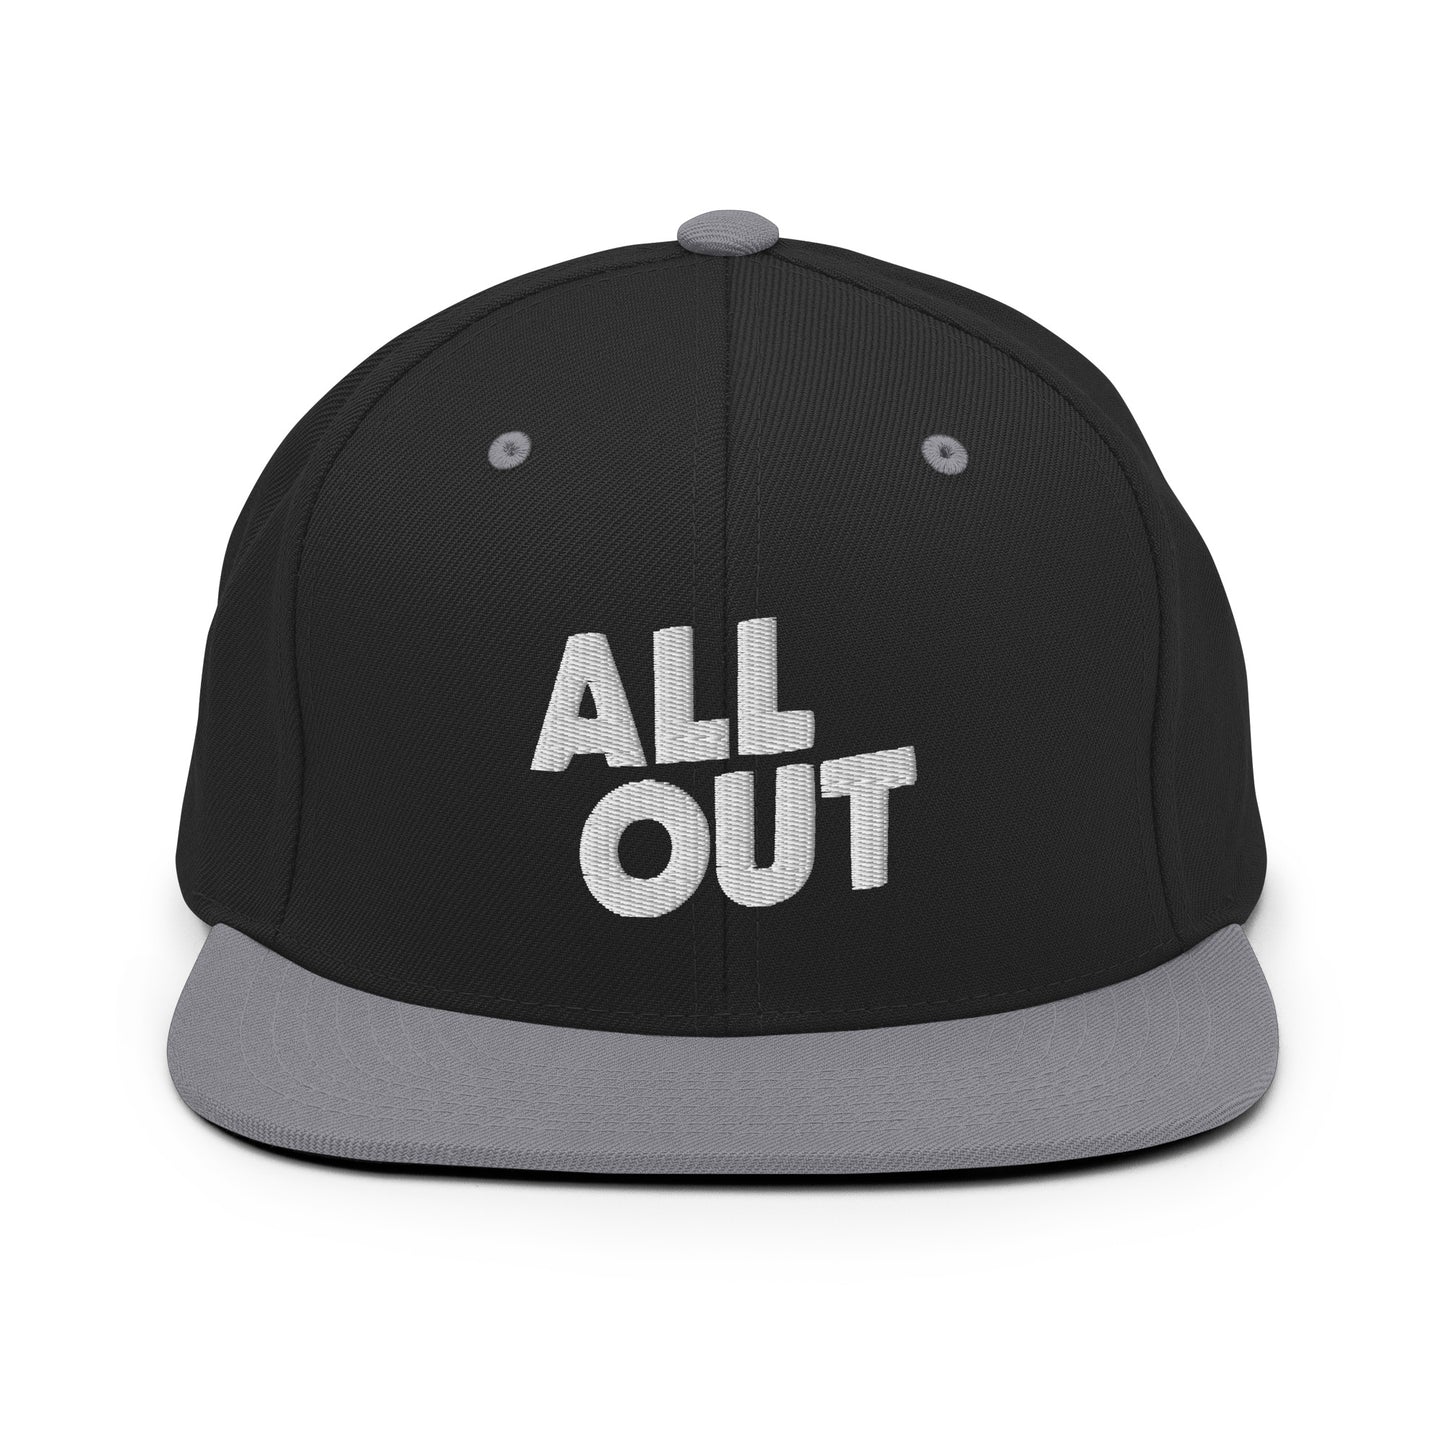 All Out - Snapback Cap